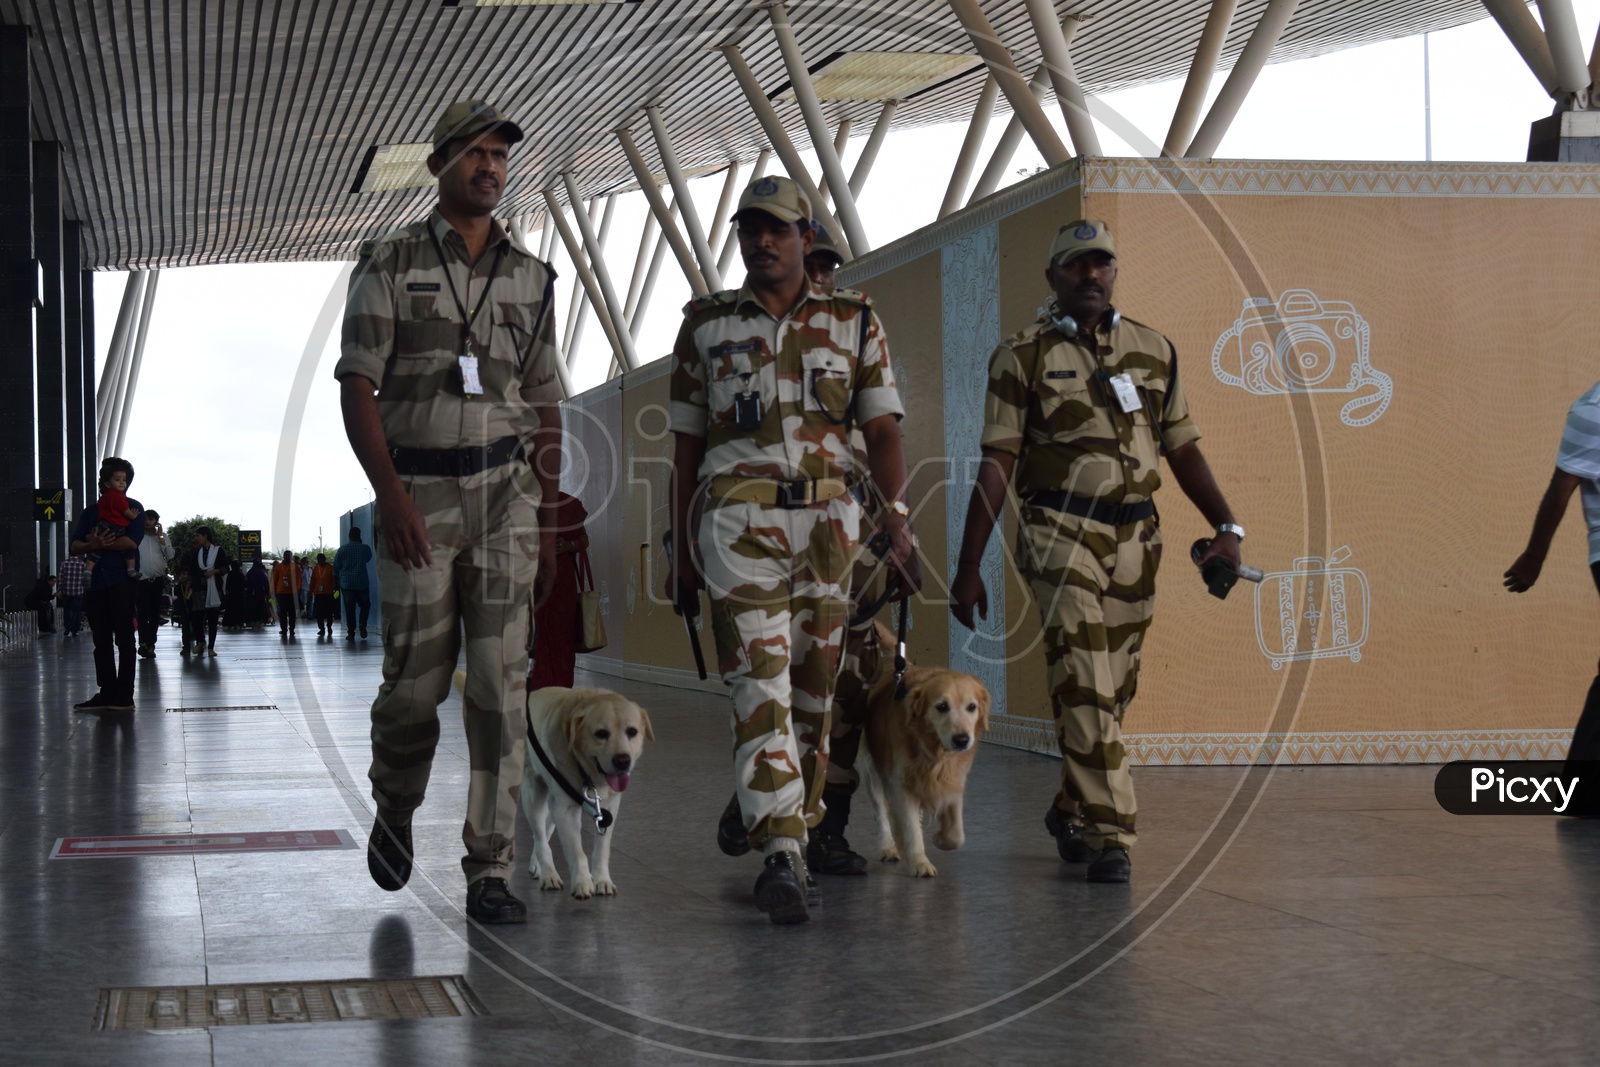 Security in Airport